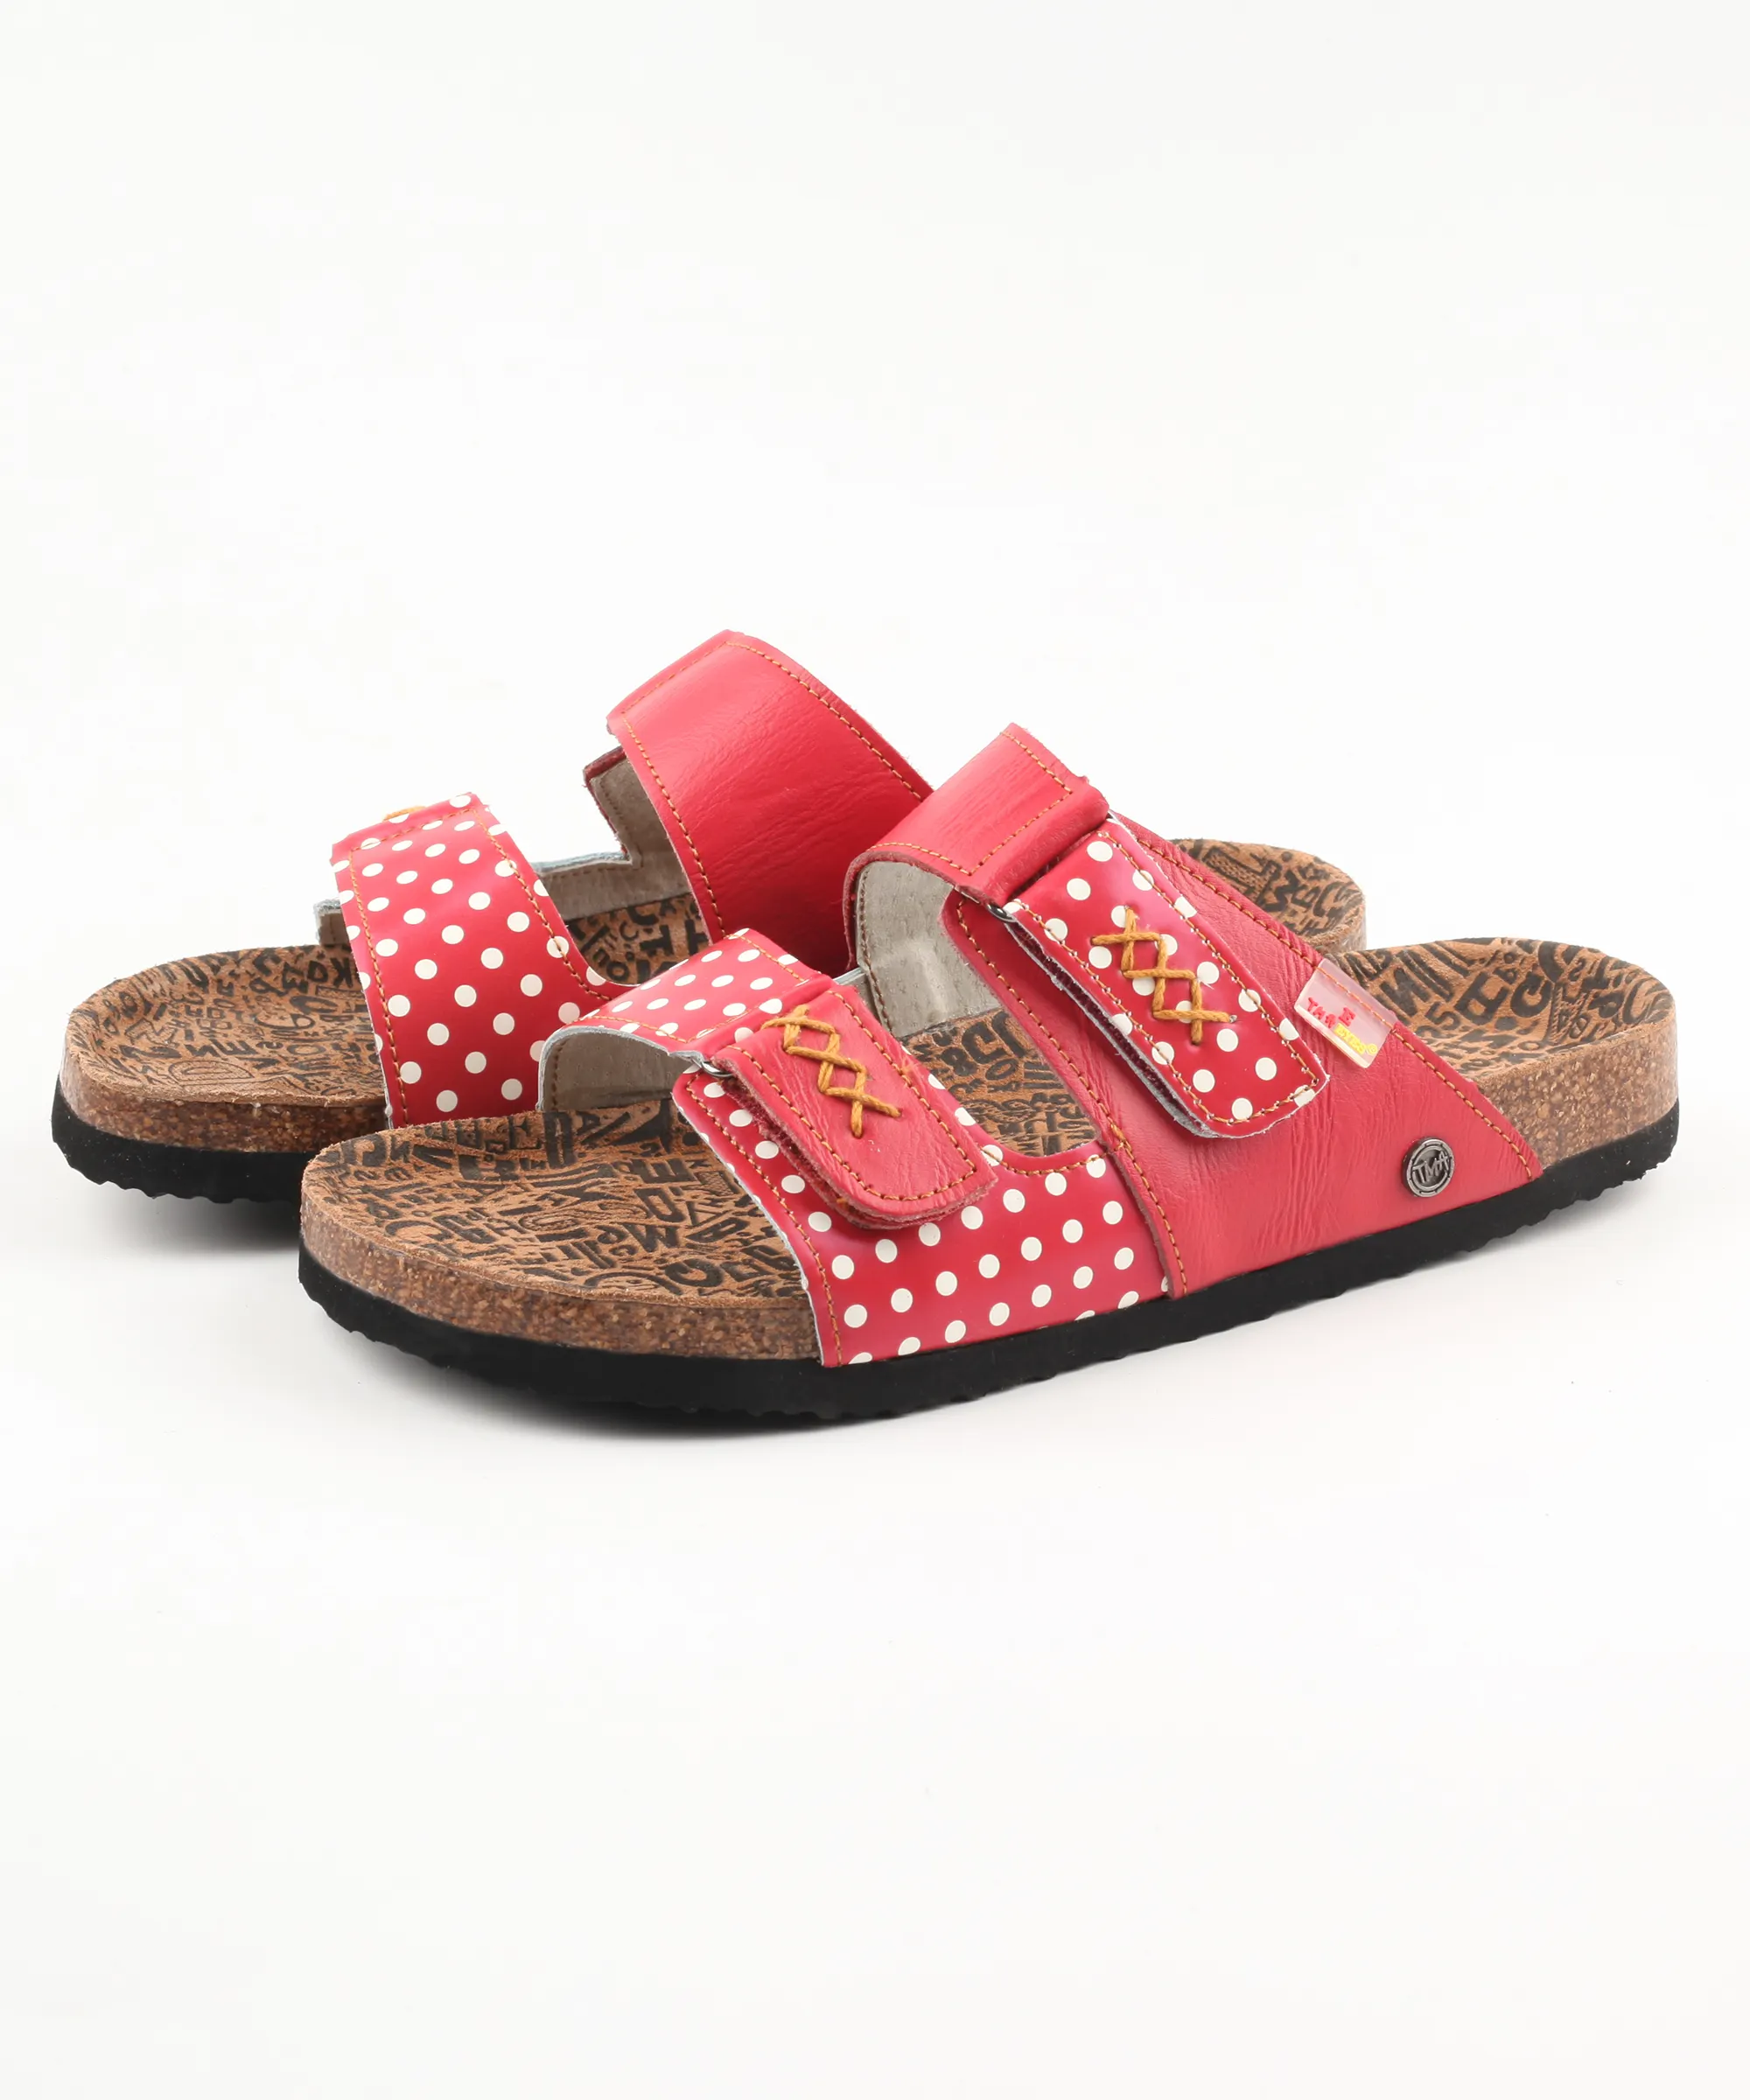 TMA EYES Wholesale Cheap Hot Sale Top Quality Fashion PU Leather Flip Flop Slipper For Sale Product Summer Cork Slides Slippers